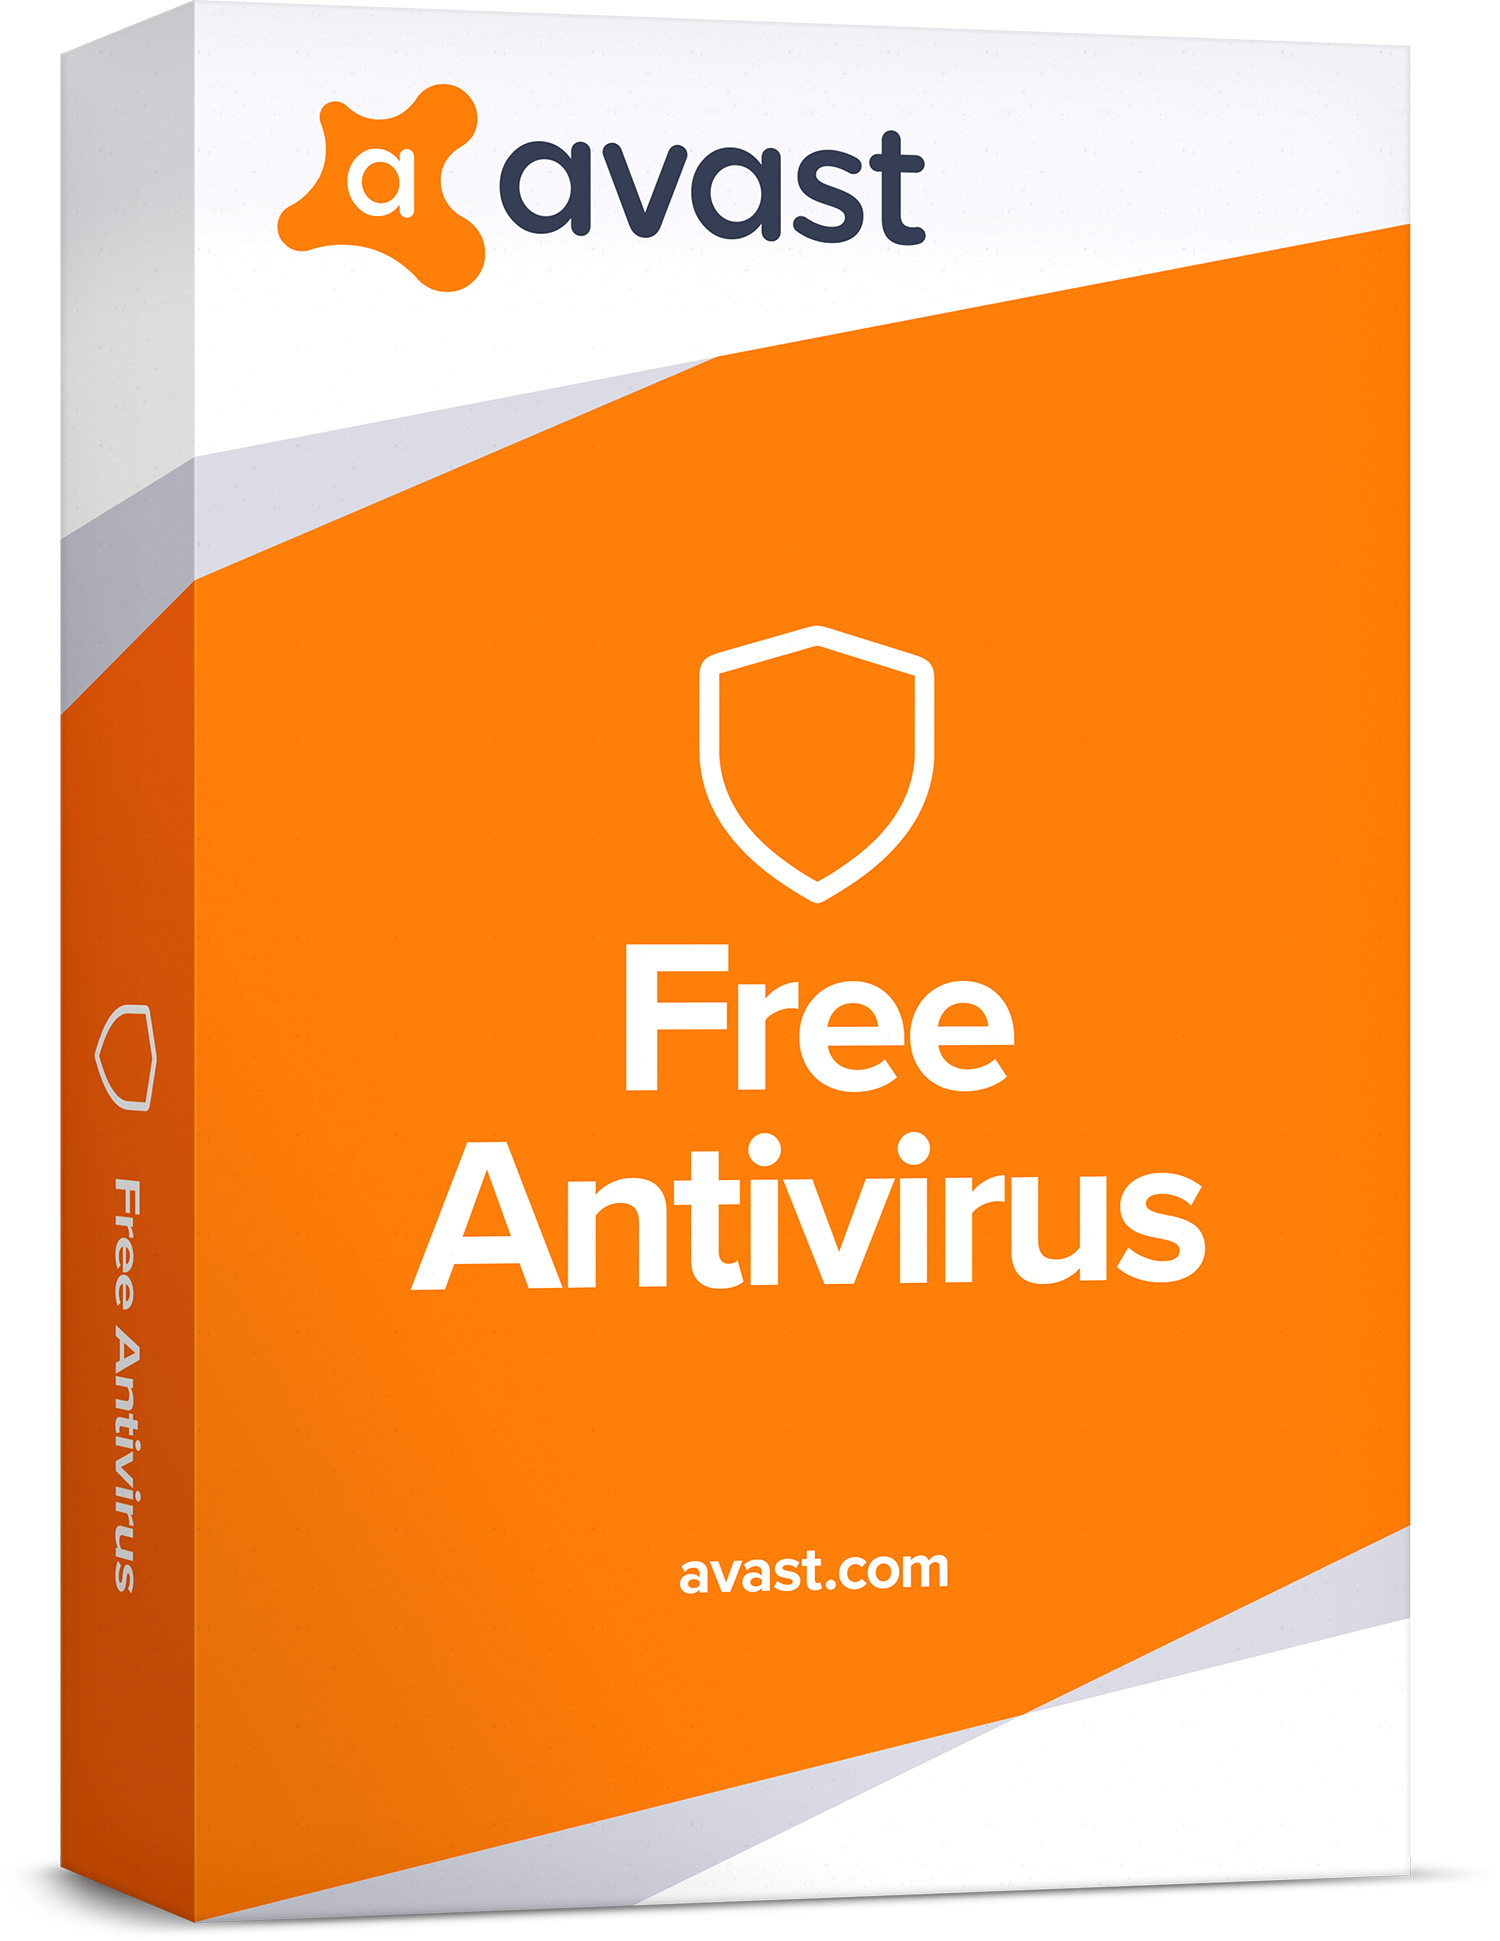 apple mail rule for avast mac security